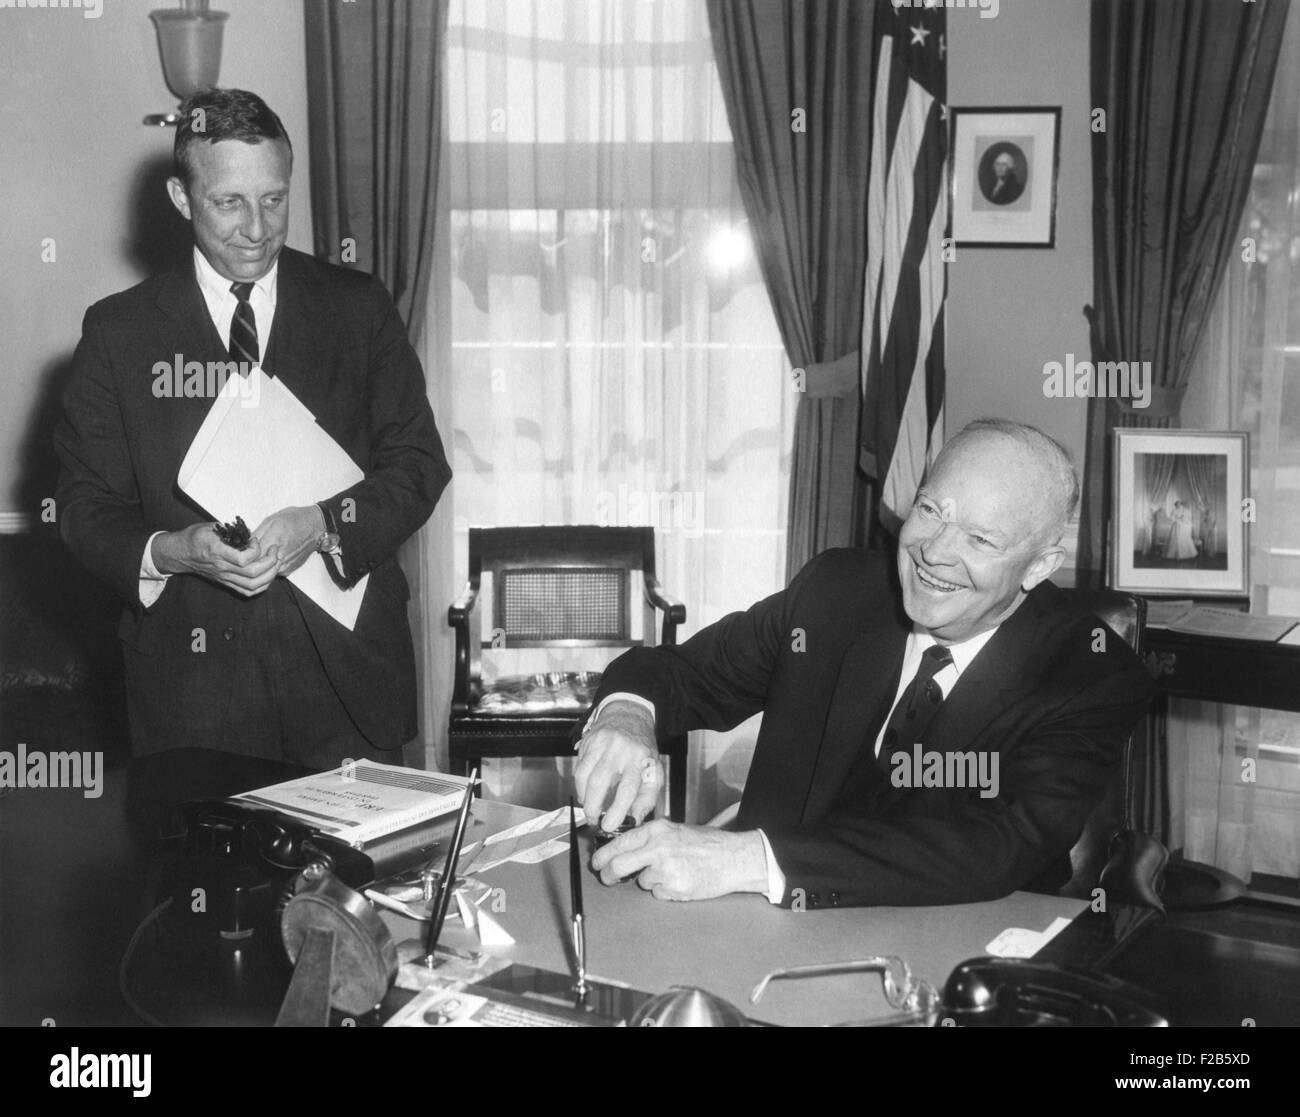 President Eisenhower is signing the Hawaii Statehood Bill in the Oval Office on March 18, 1959. At left is Henry McPhee, Associate Special Counsel to the President, who assisted with economic and legal matters. - (BSLOC 2014 16 239) Stock Photo